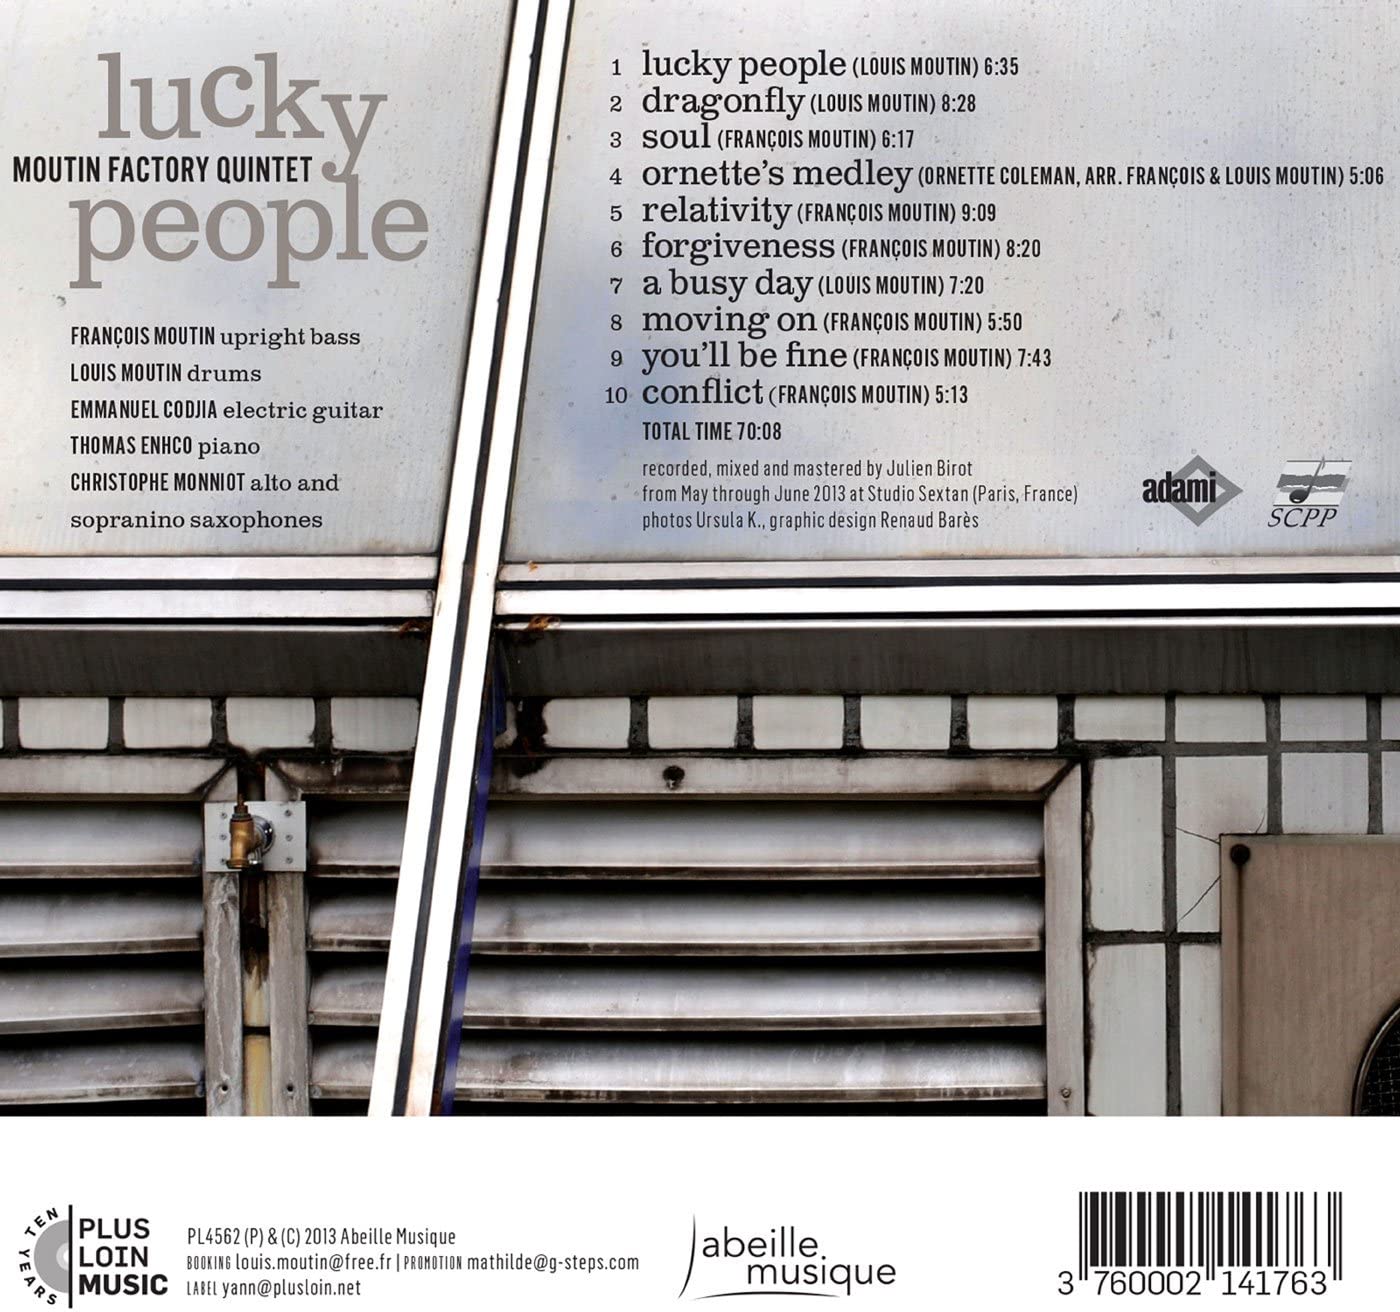 Moutin Factory Quintet: Lucky People - slide-1